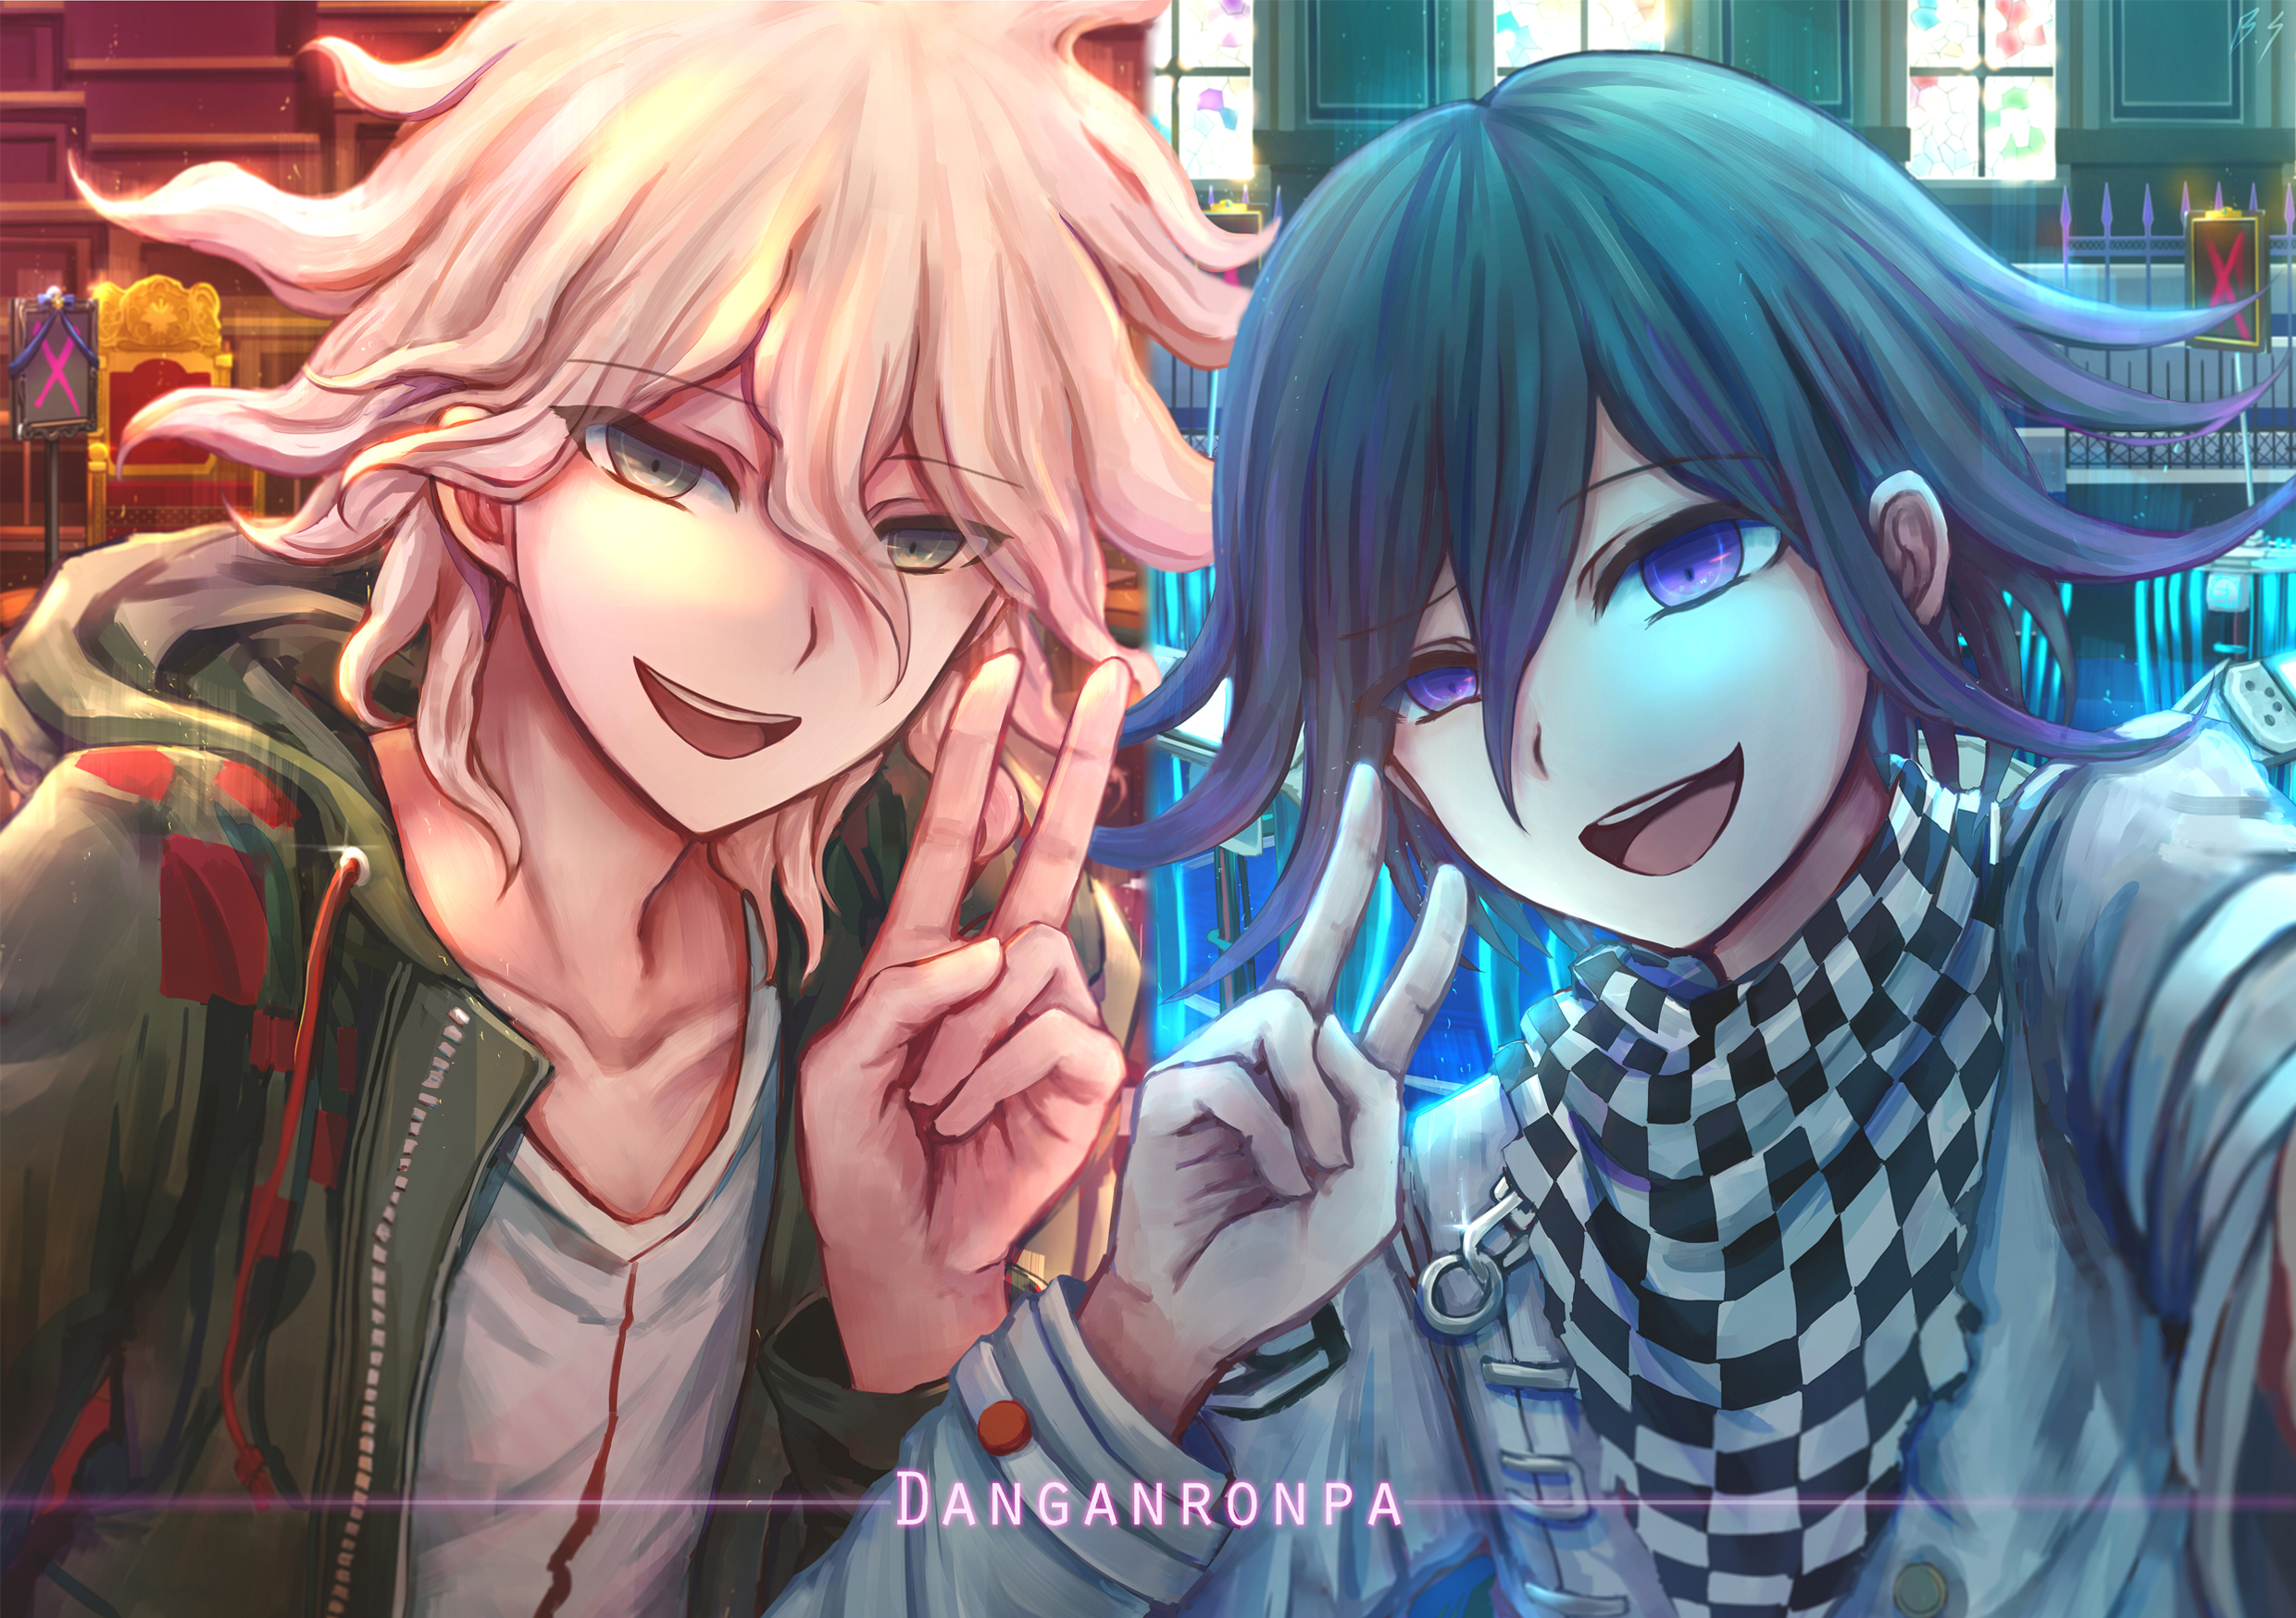 6 Nagito Wallpapers for iPhone and Android by Ashlee Goodwin